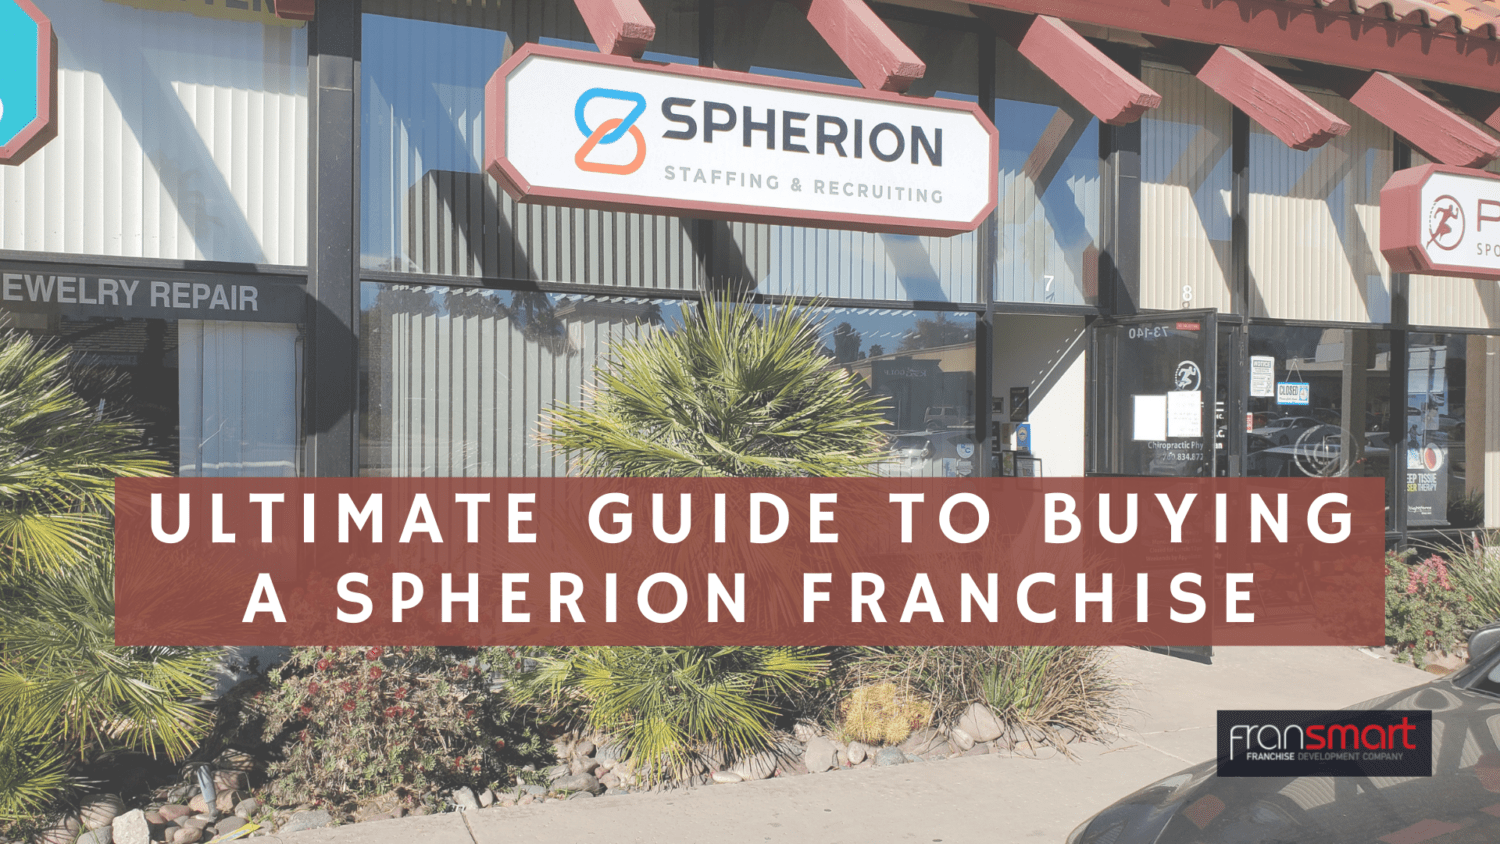 Ultimate Guide to Buying a Spherion Franchise